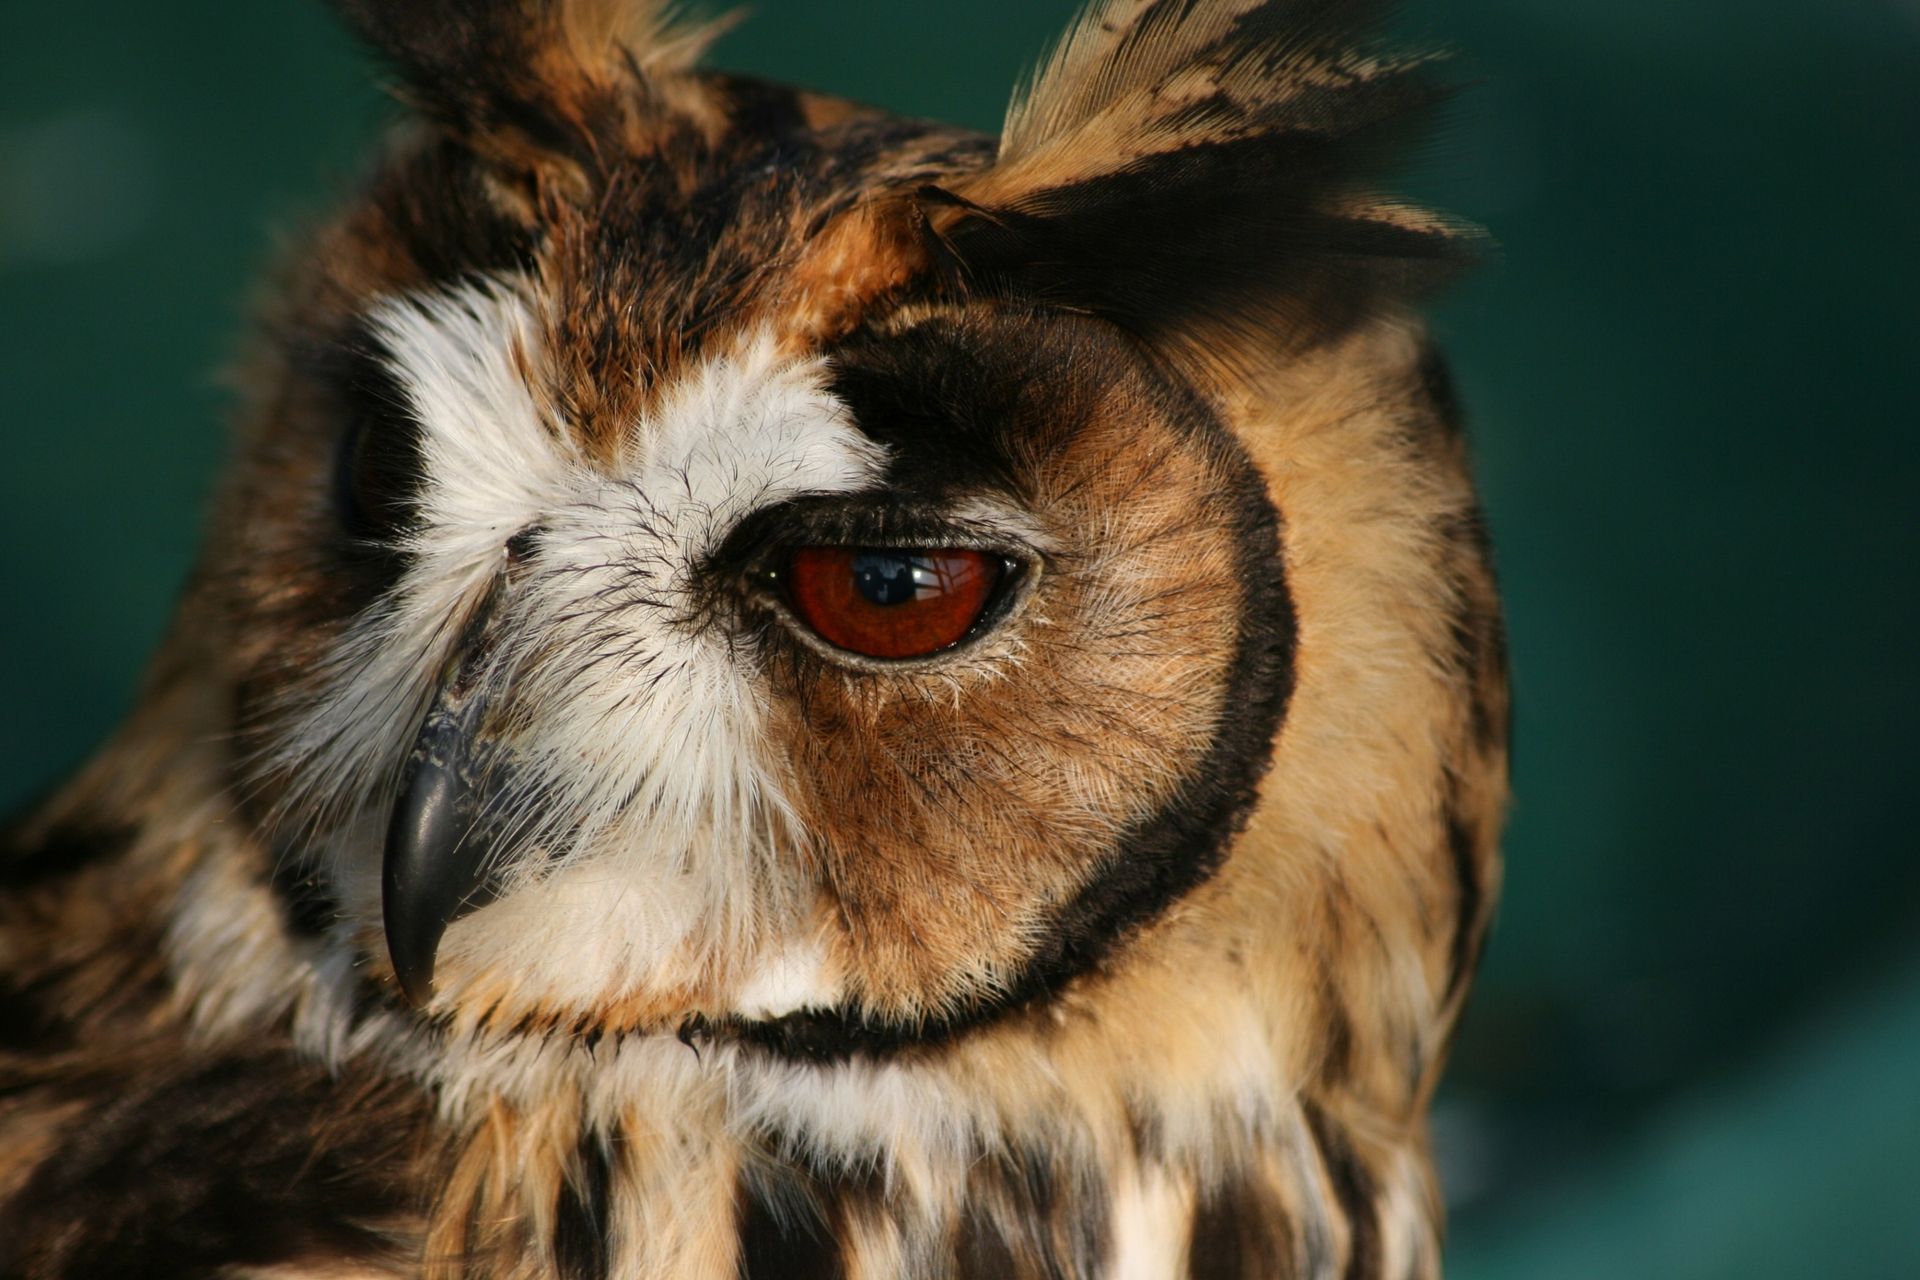 A portrait of a striped owl, which is found mainly in Central and South America.